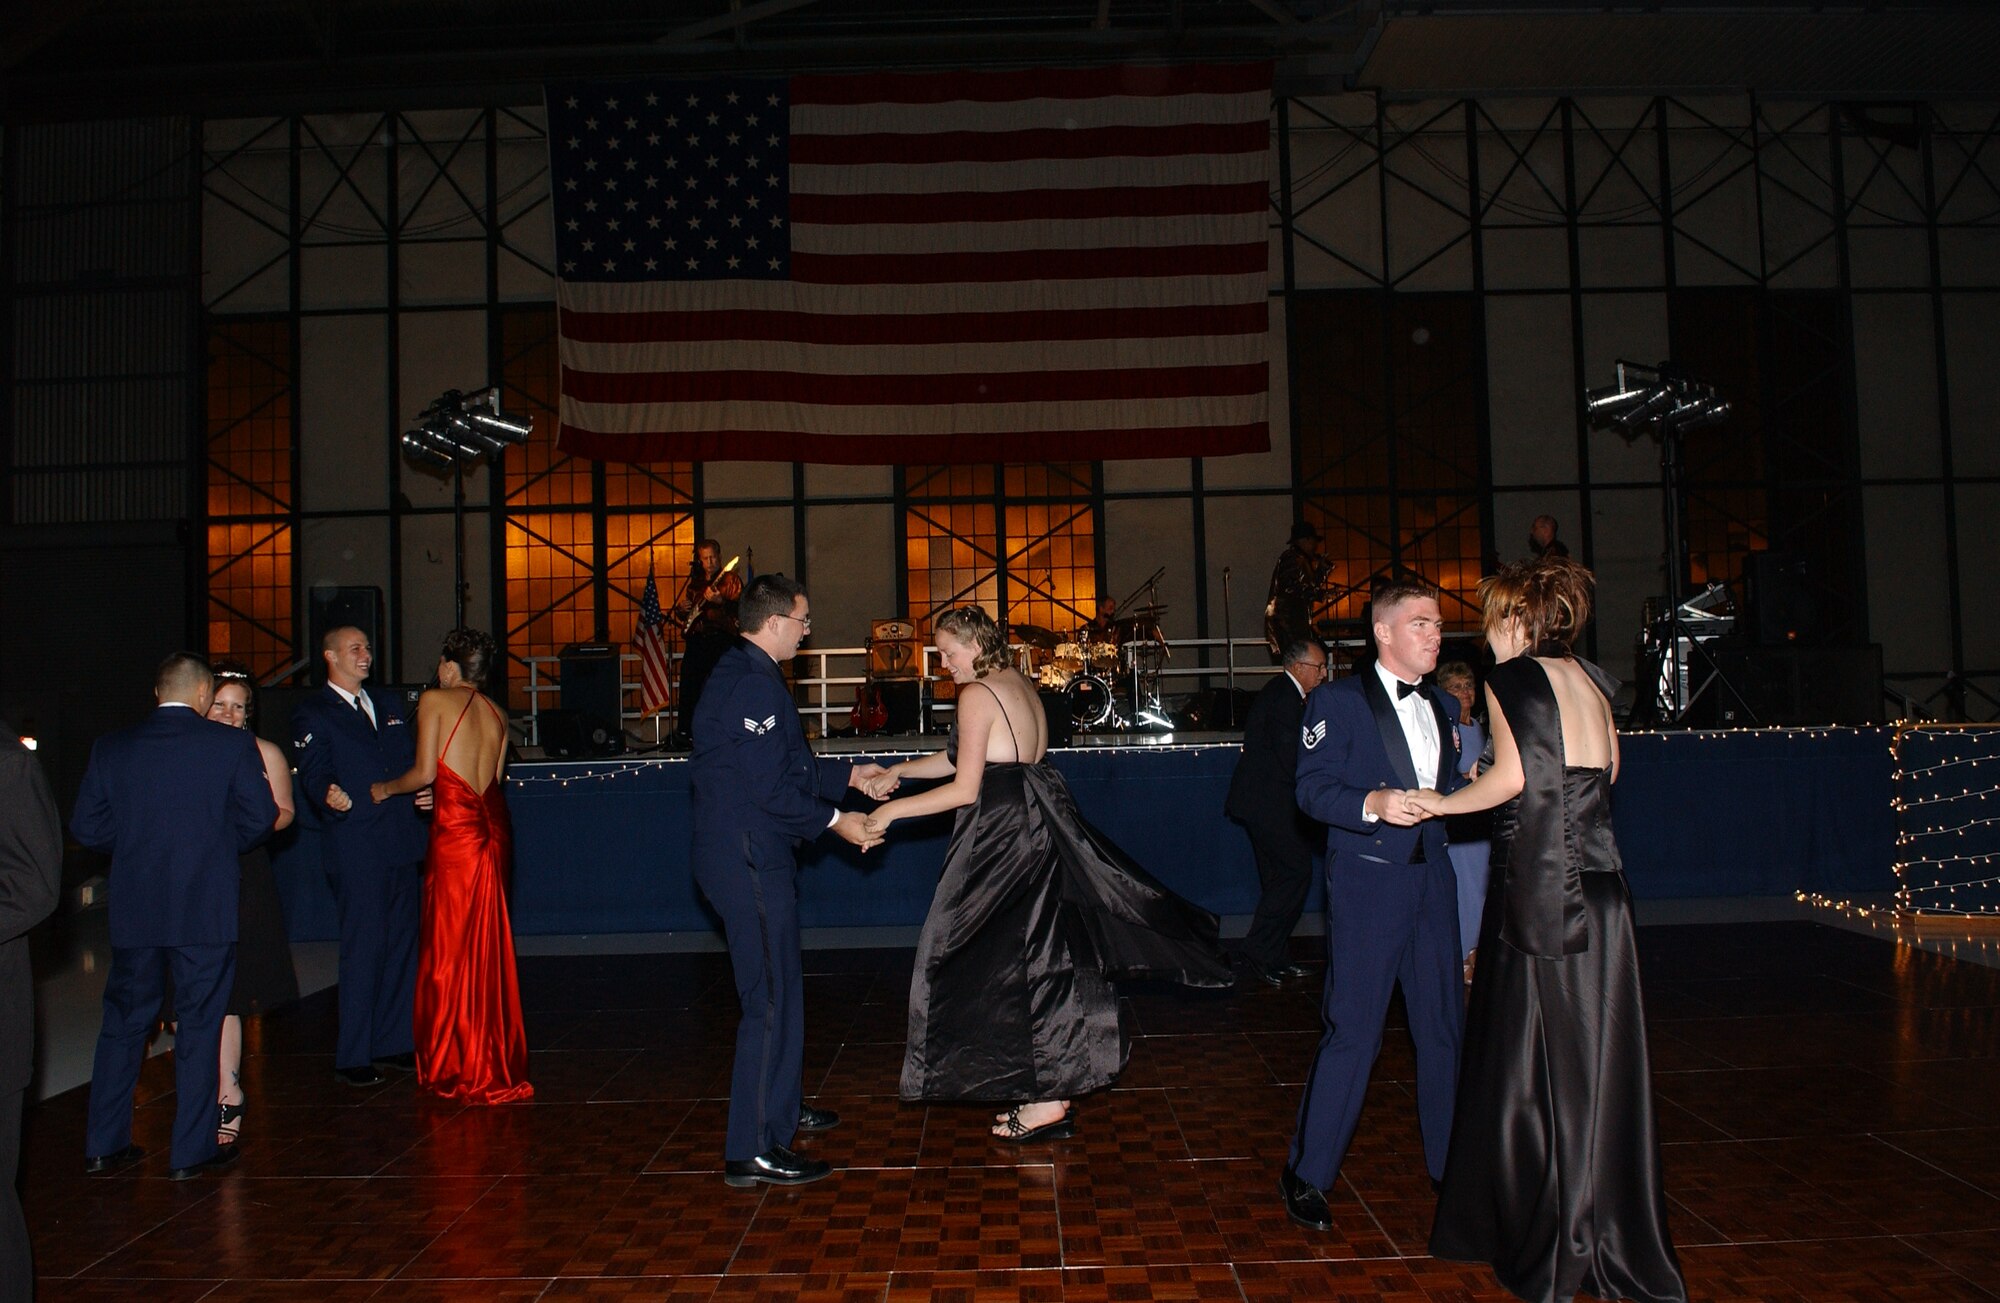 MCCHORD AIR FORCE BASE, Wash. — Airmen and their guests dance to the music of Emerald City Throw Down during the Air Force Ball.
(U.S. Air Force photos/Abner Guzman)

